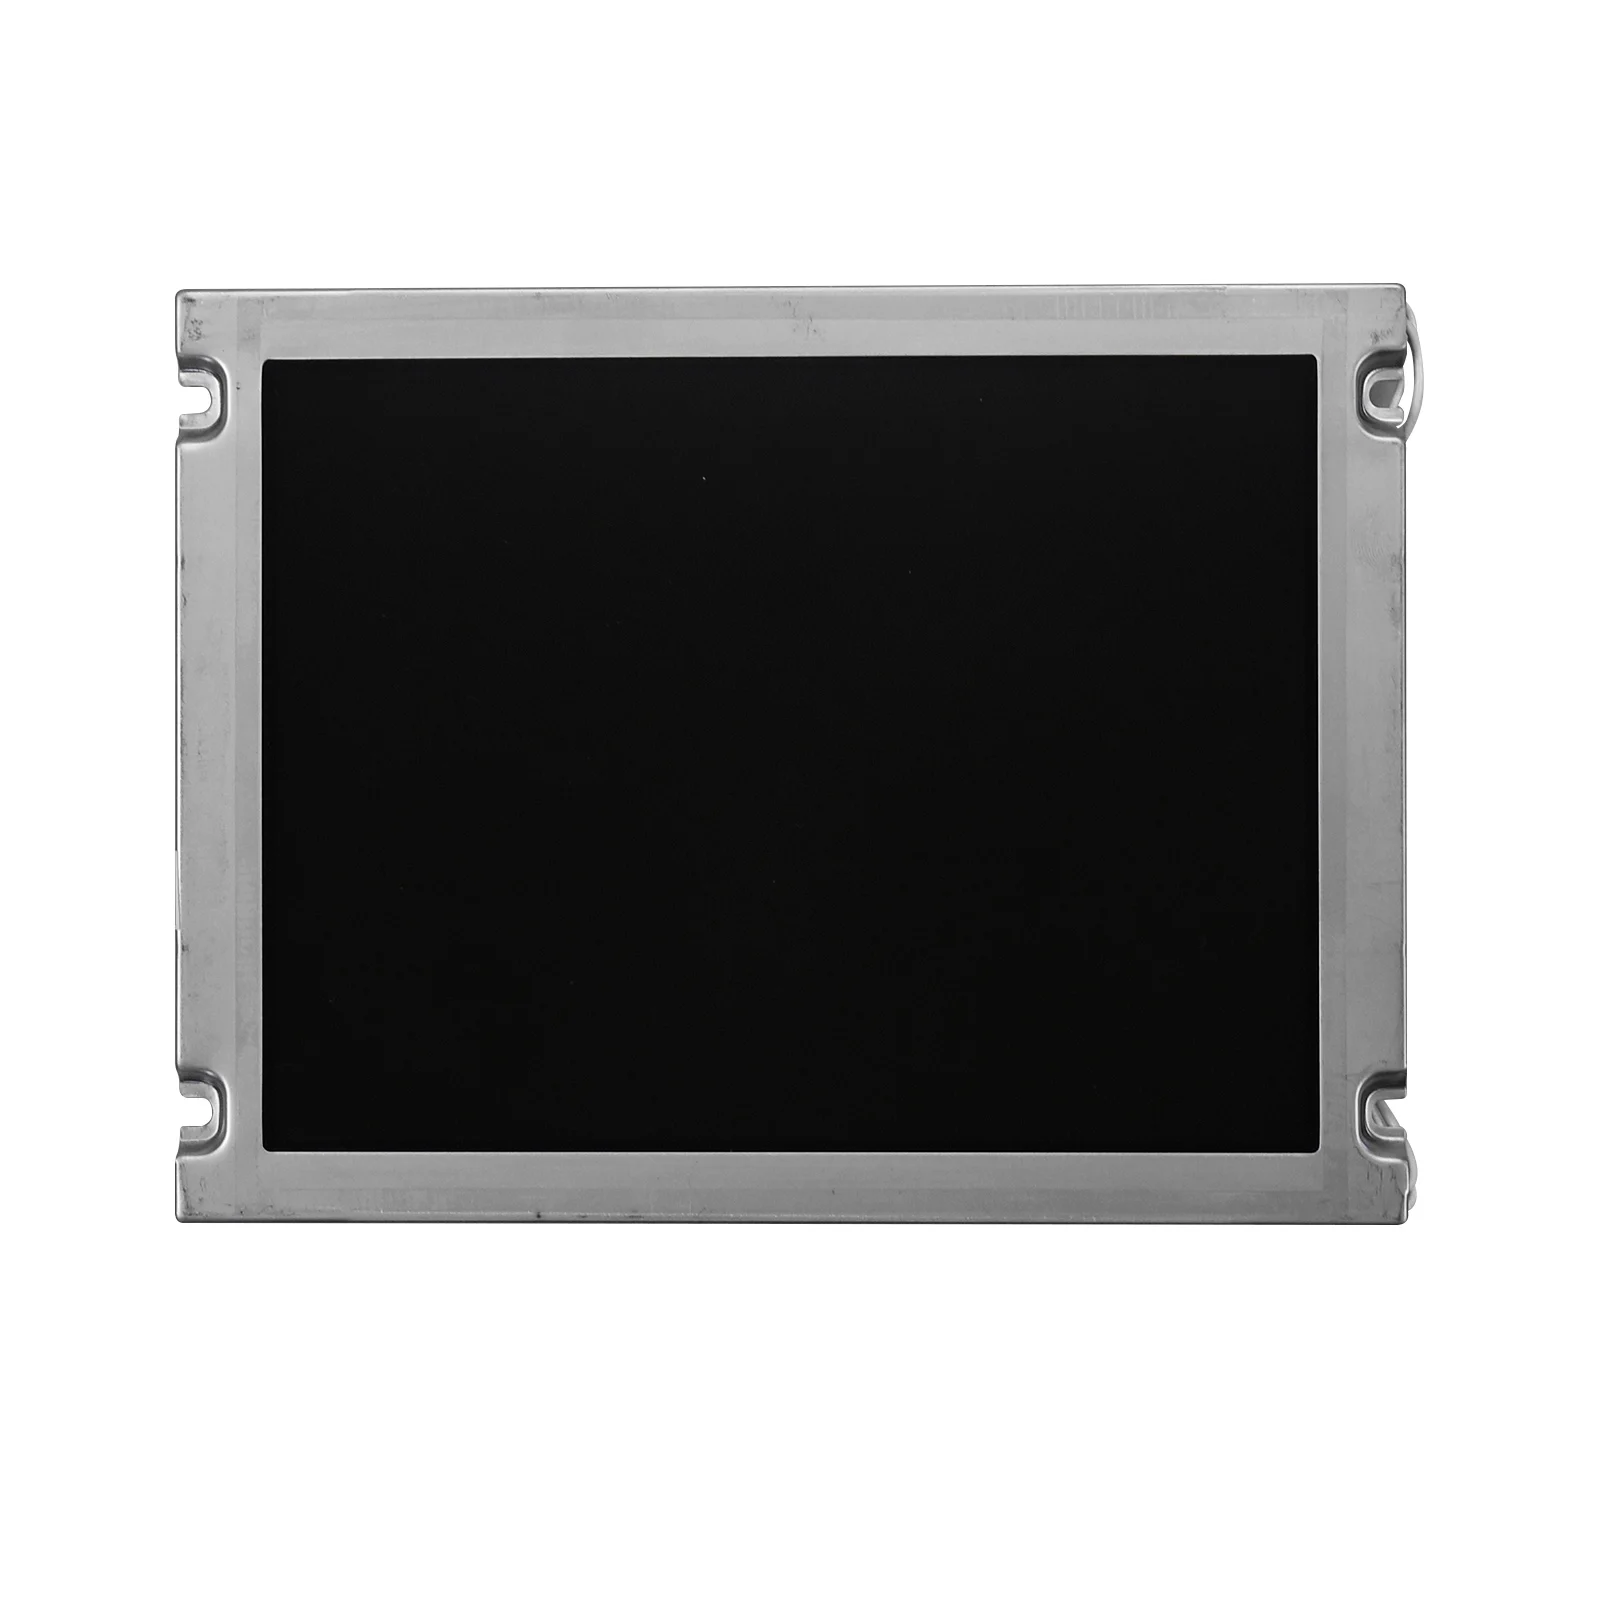 

6.5inch For OPTREX 640*480 T-51750AA LCD Screen Display T-51750GD065J-FW-ADN Digitizer Monitor Replacement